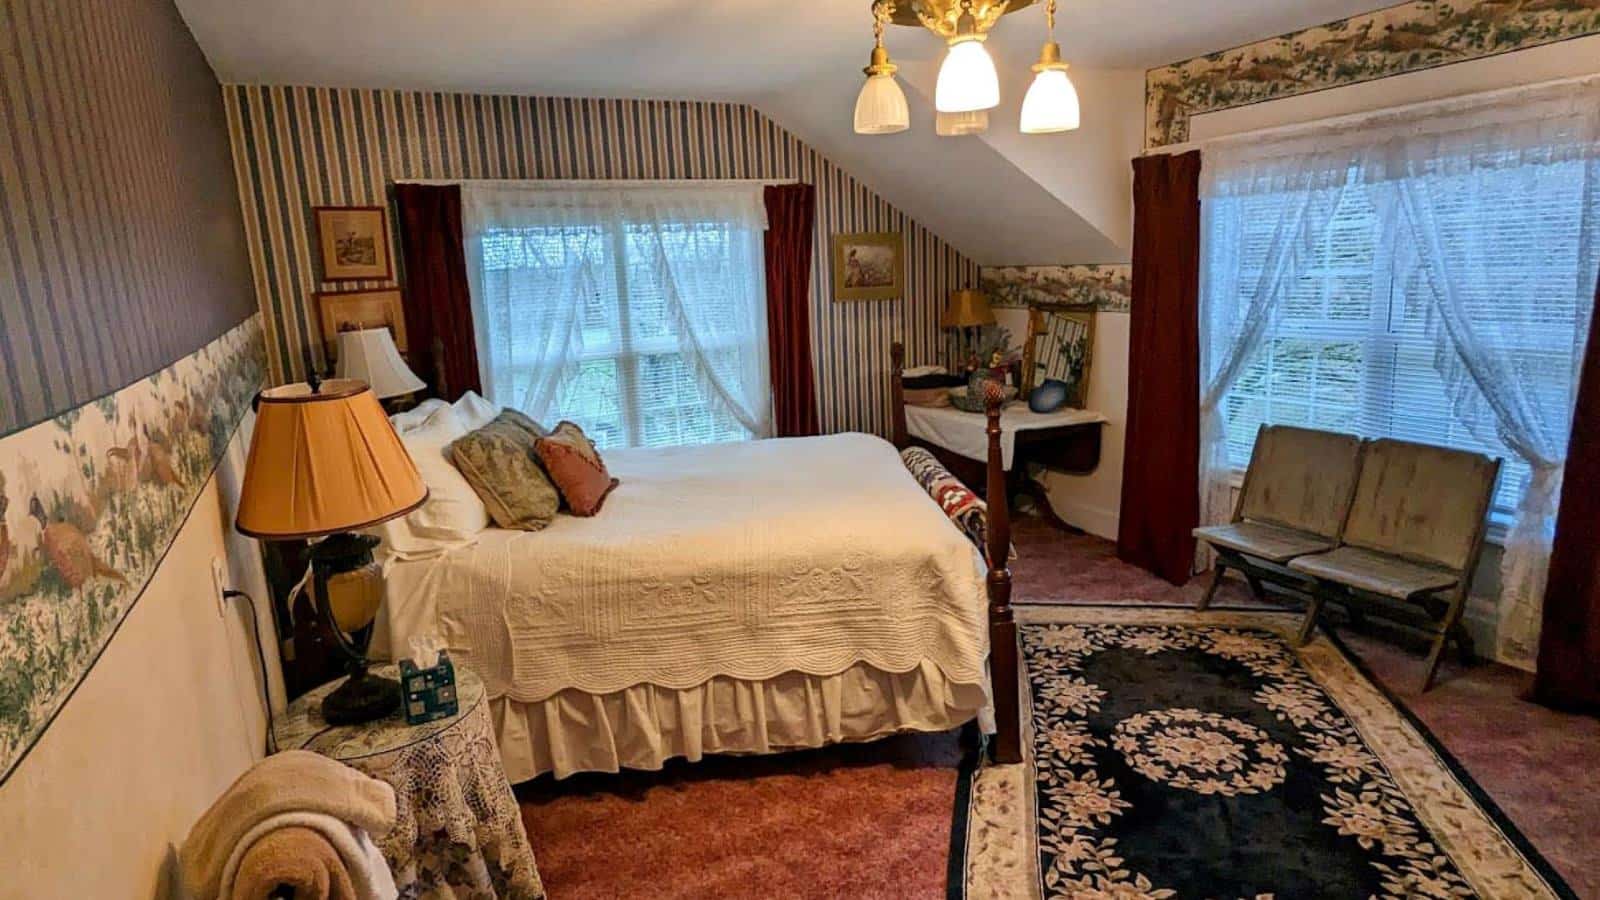 Bedroom with white walls, pheasant and striped wallpaper, carpeting, wooden four poster bed, white bedding, and large windows